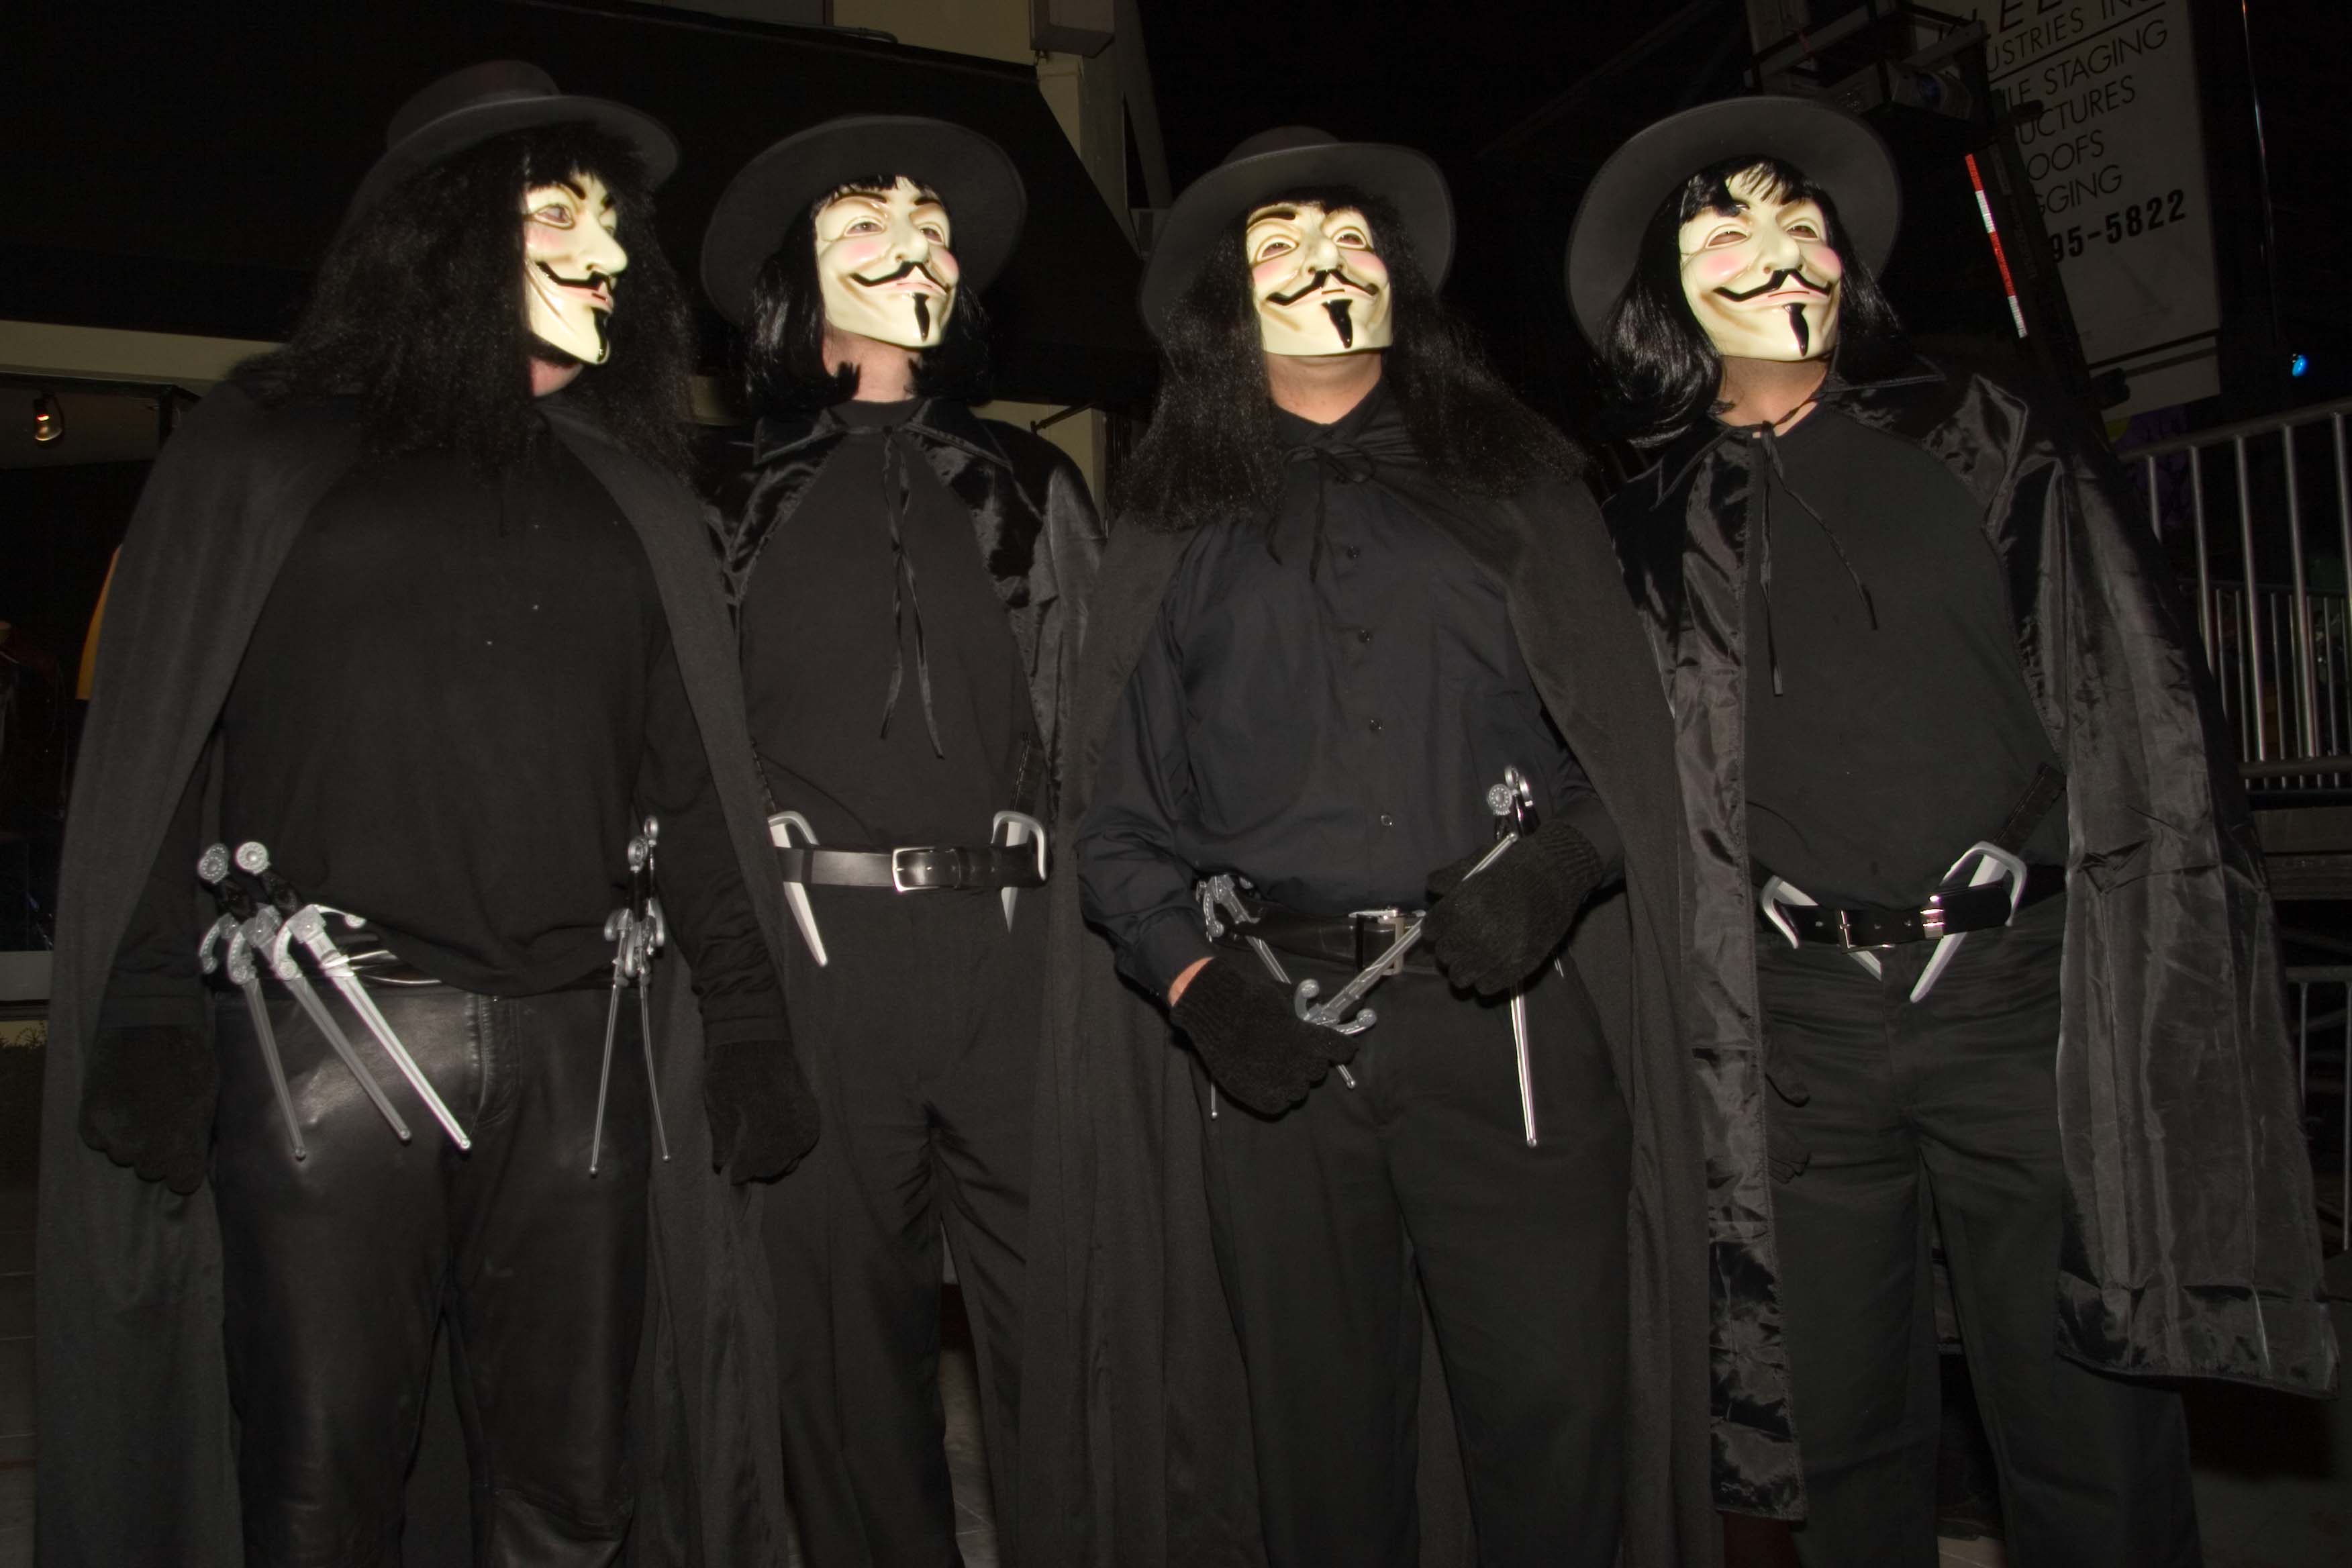 V For Vendetta - These Guys Looked So Cool Walking The Street Together